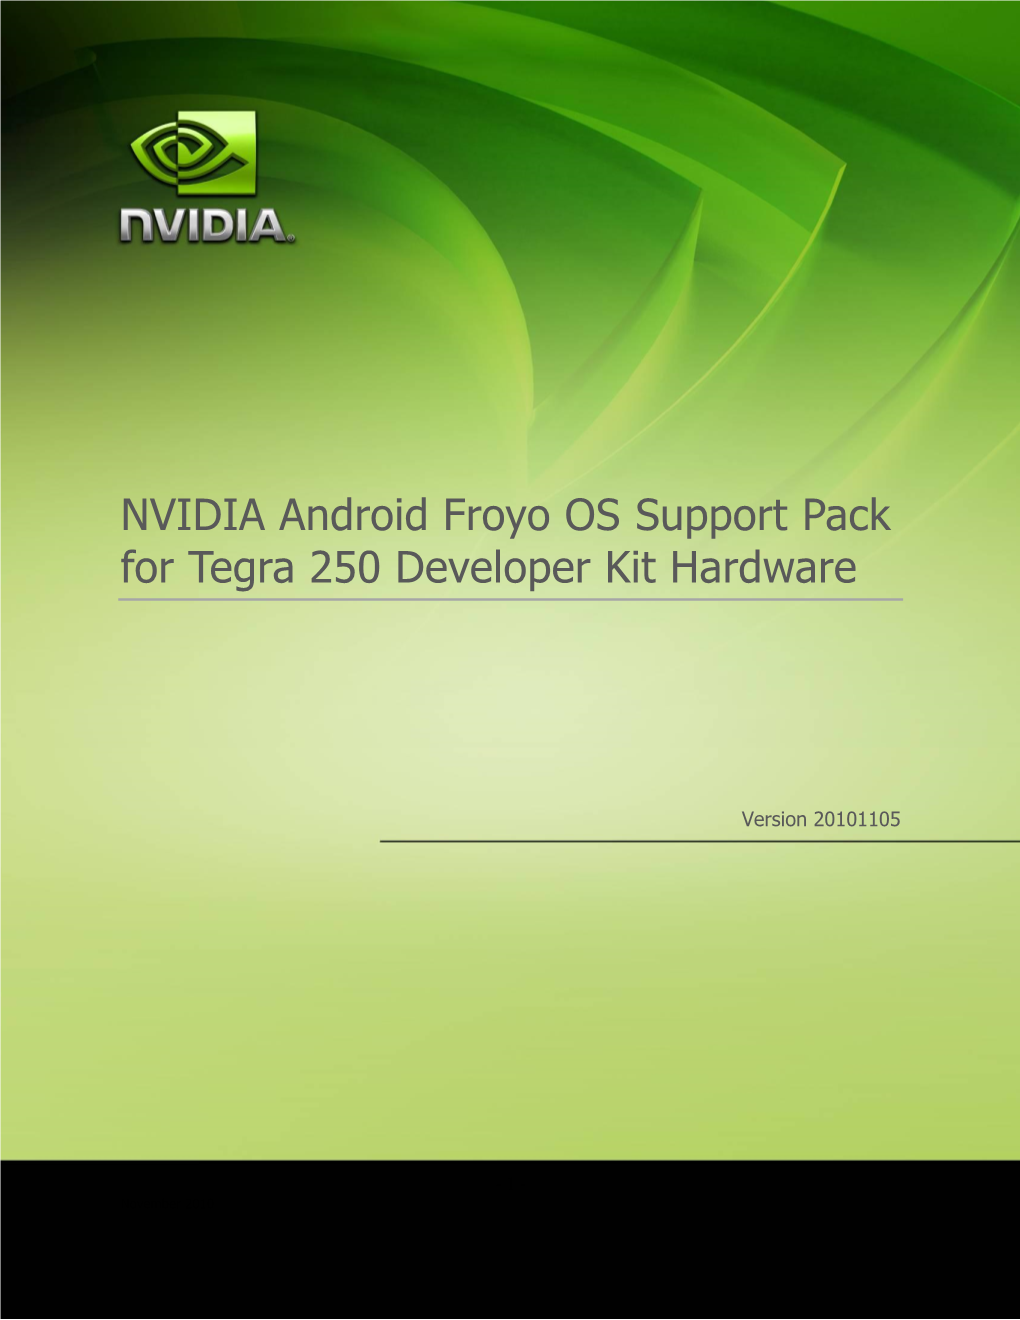 NVIDIA Android Froyo OS Support Pack for Tegra 250 Developer Kit Hardware